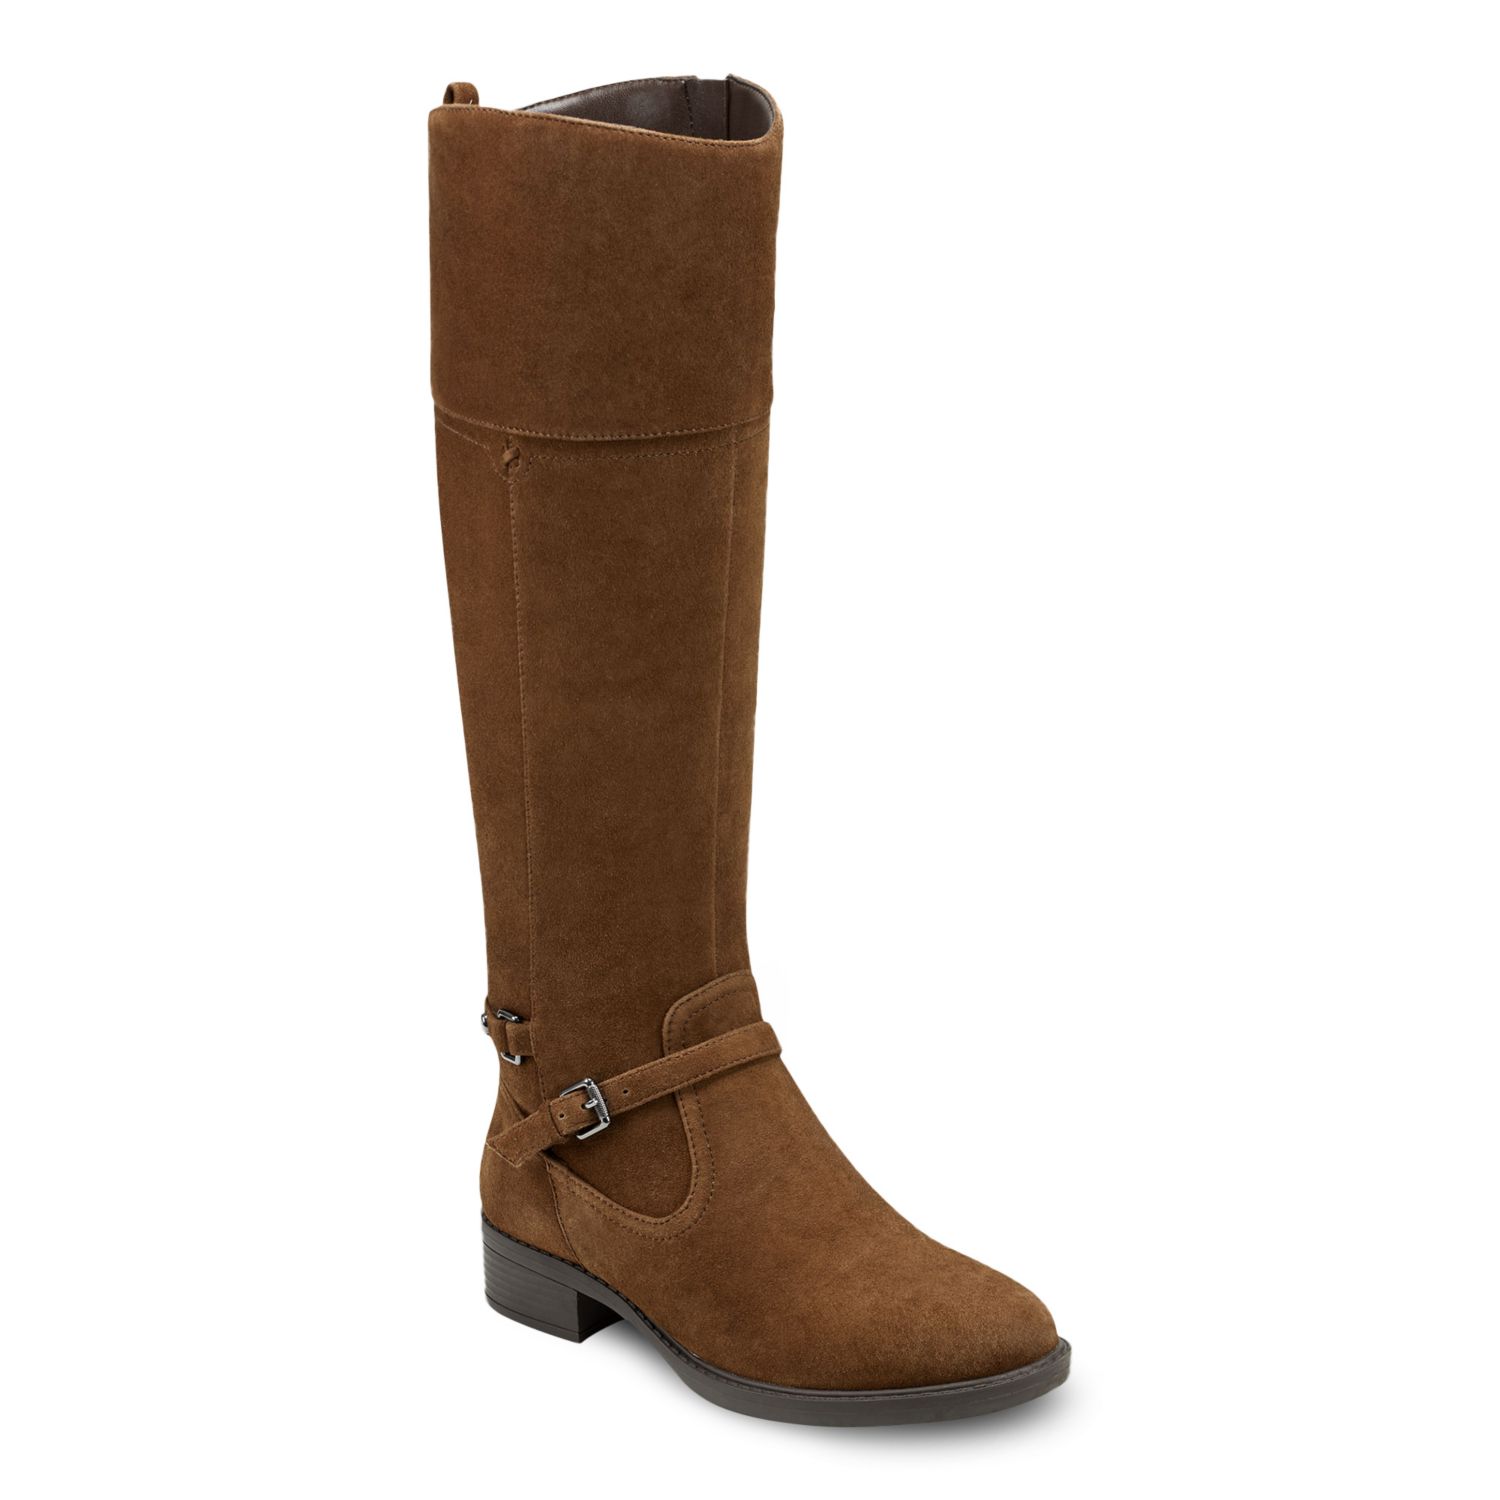 Image for Easy Spirit Leigh Women's Suede Knee-High Boots at Kohl's.